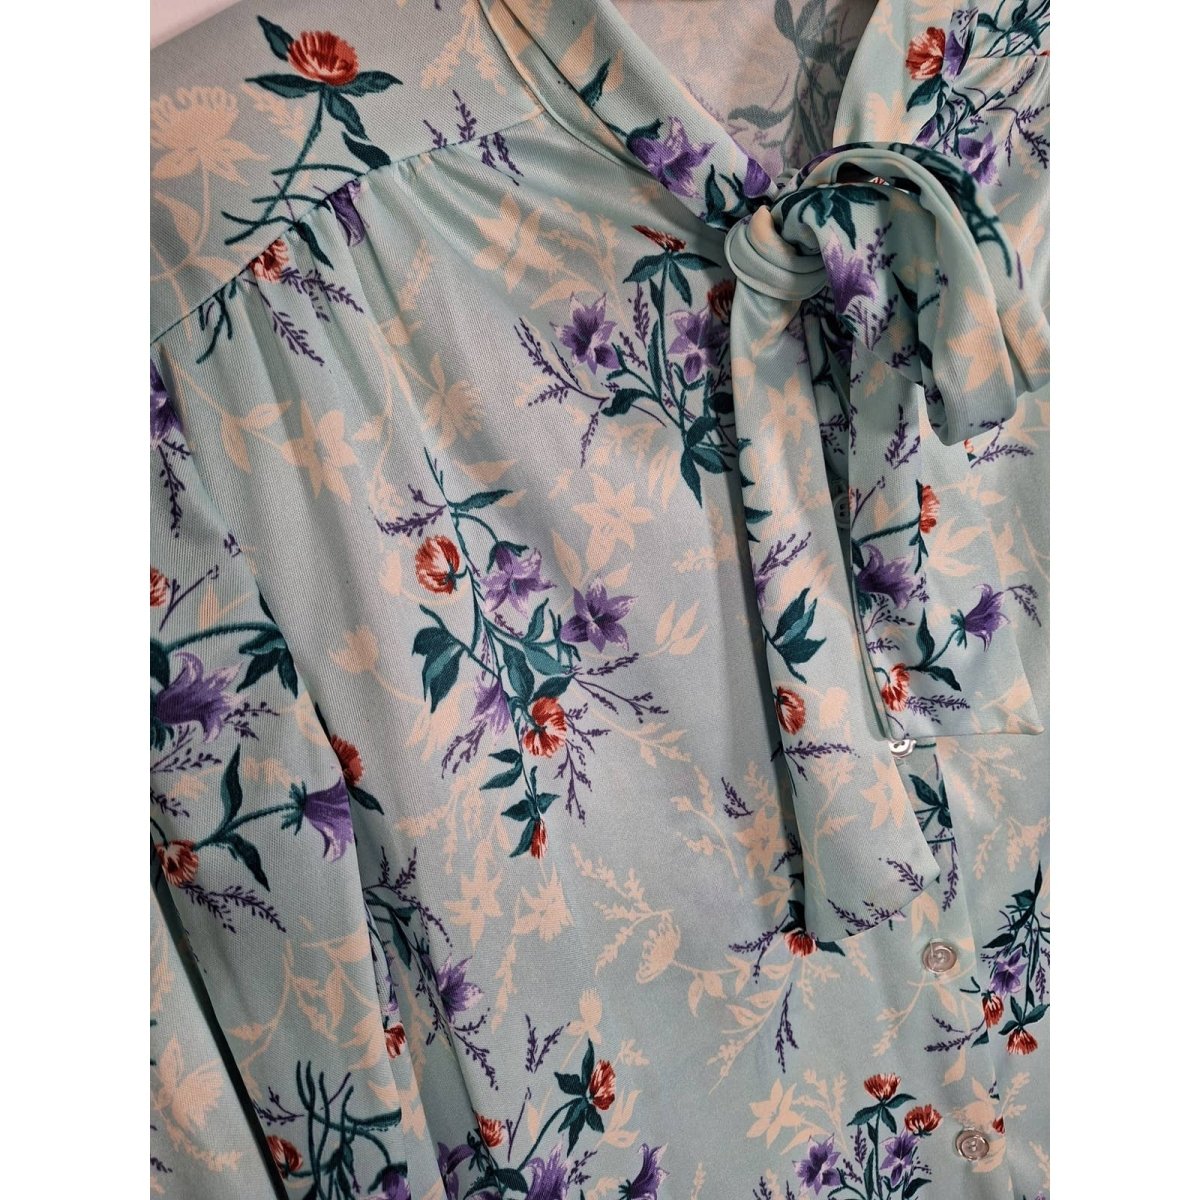 70s Floral Bow Blouse Size Large Chest up to 42" - themallvintage The Mall Vintage